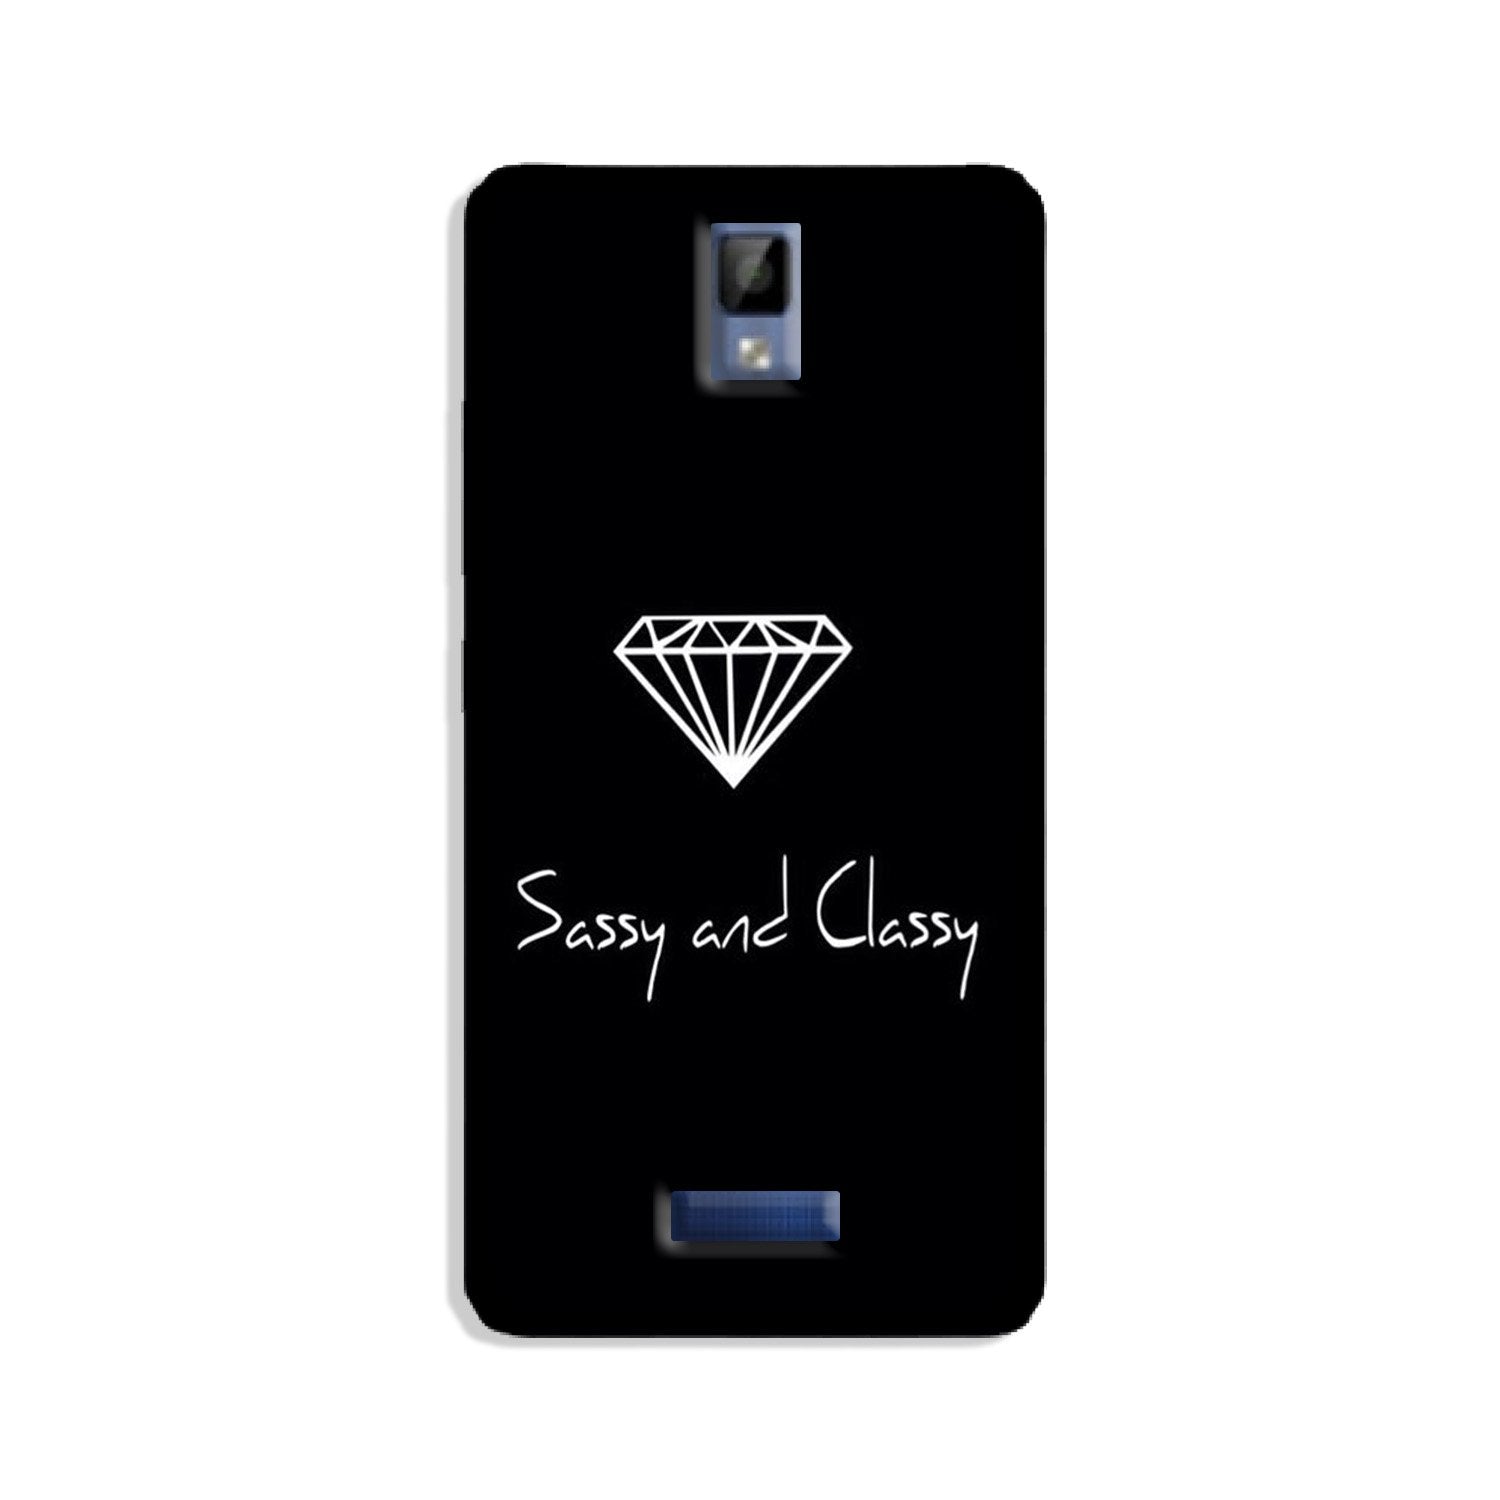 Sassy and Classy Case for Gionee P7 (Design No. 264)